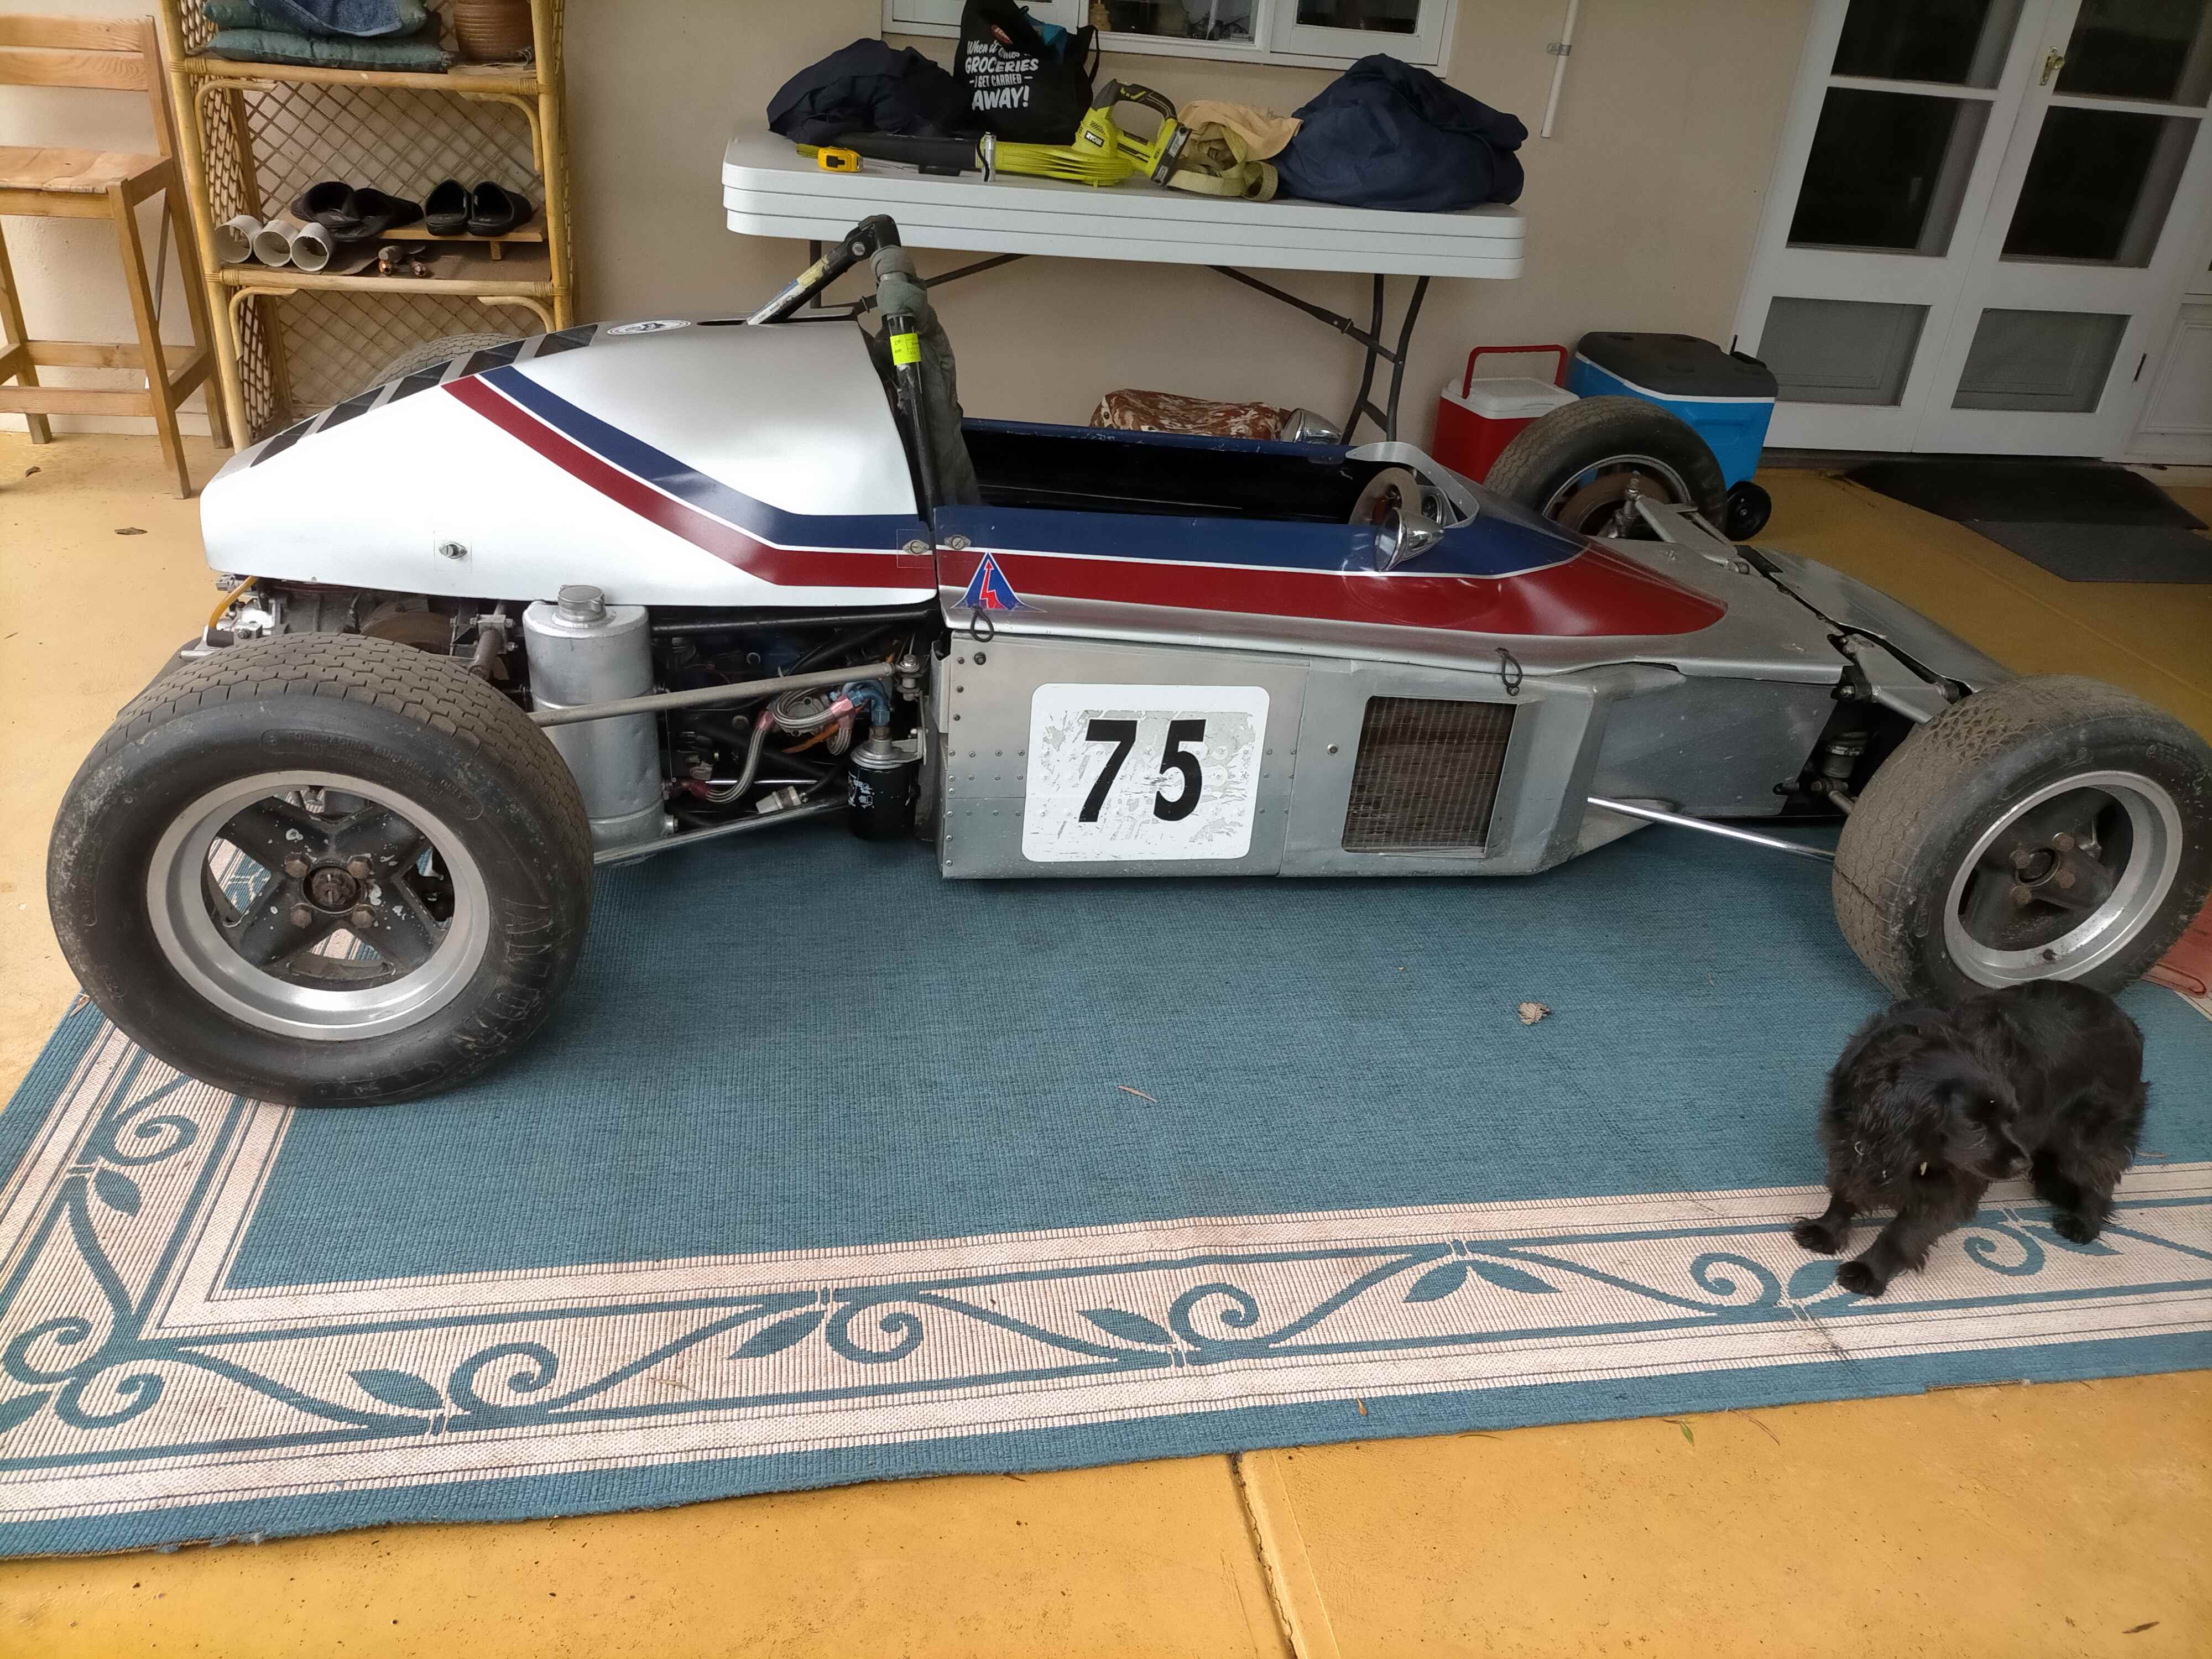 <br><b>The Car details and Owner history are as follow: </b><br>?Original owner? Louis Saker, first race May 1977, owned till -1996 <br>Gary Ryan 1997 3 race meetings <br>Chris Swingler 9 race meetings <br>John Connelly 2005 25 meetings<br>Bill Vesty 2012 15 meetings until 2018<br>